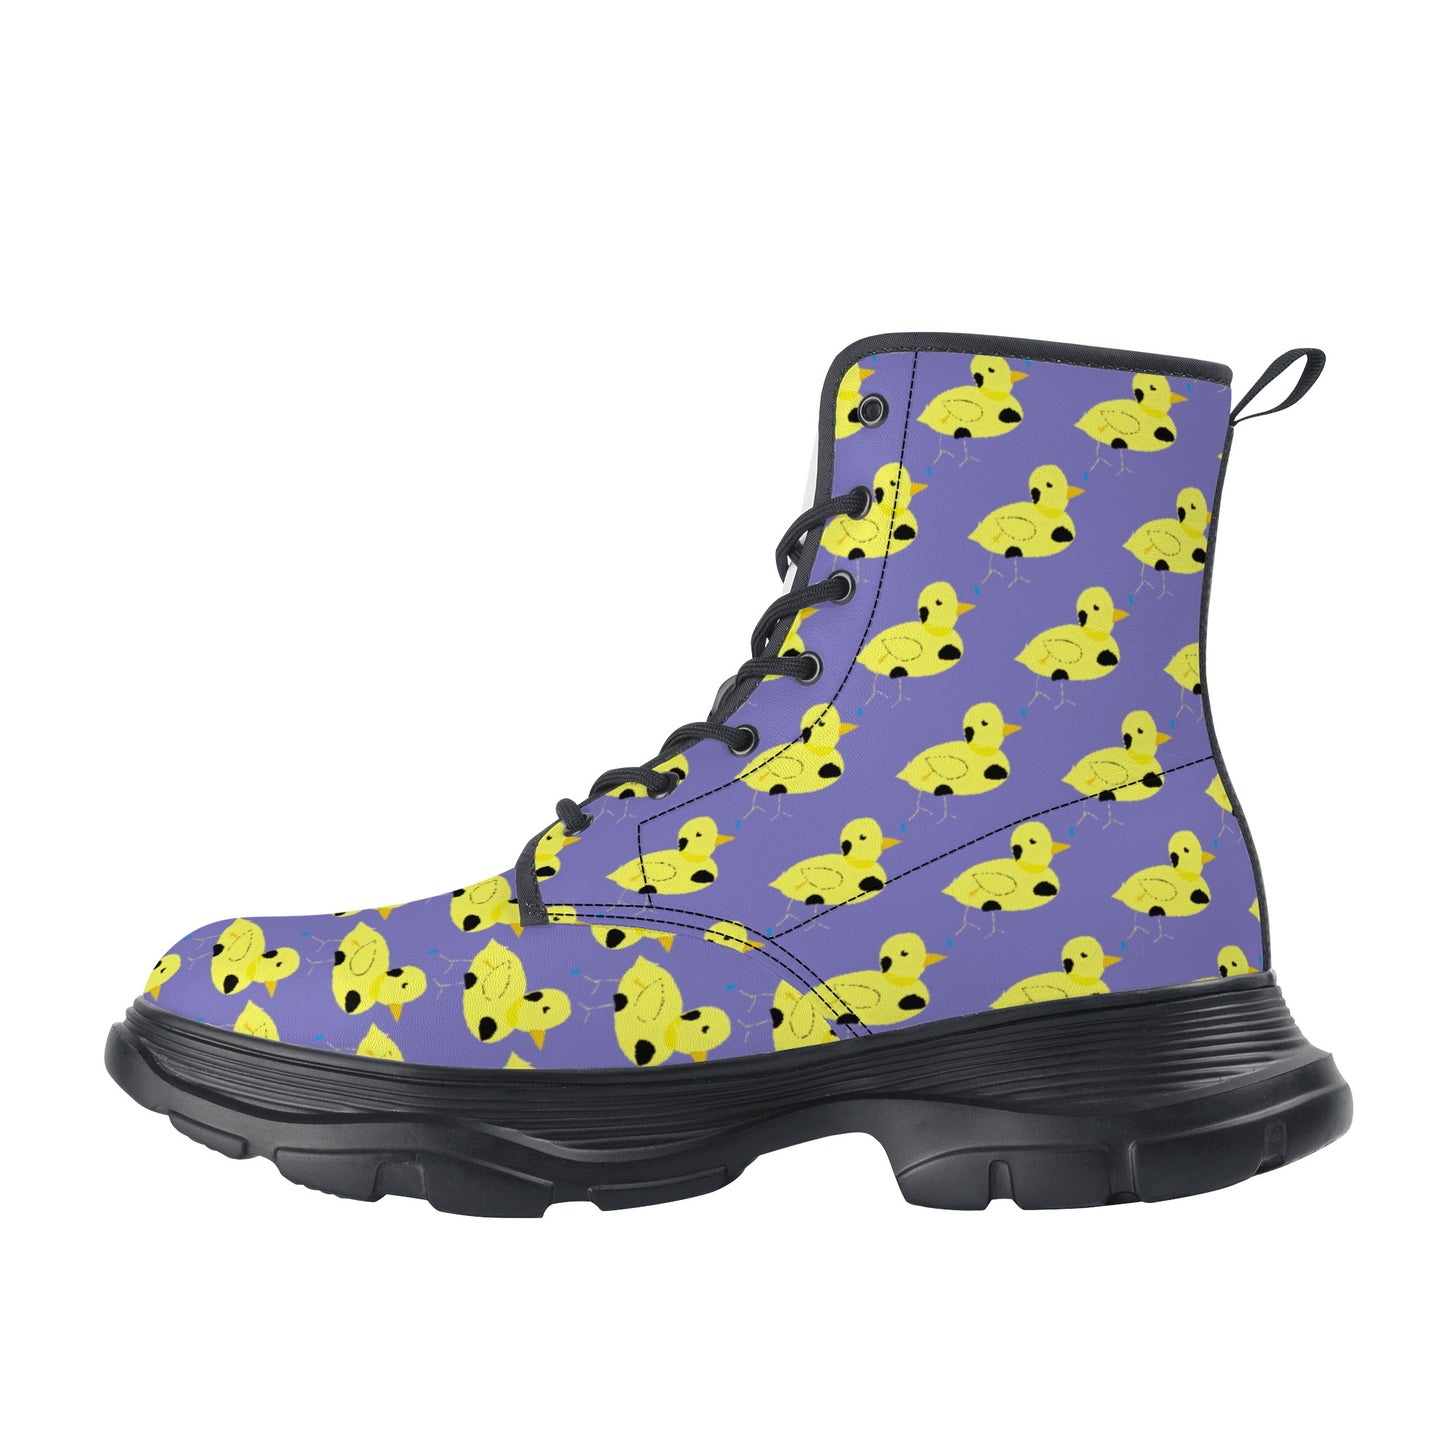 The Duckie featuring Myrtle the Four-Legged Chicken by Artist D.B. Vegan Leather Chunky Boots (Womens Sizing)